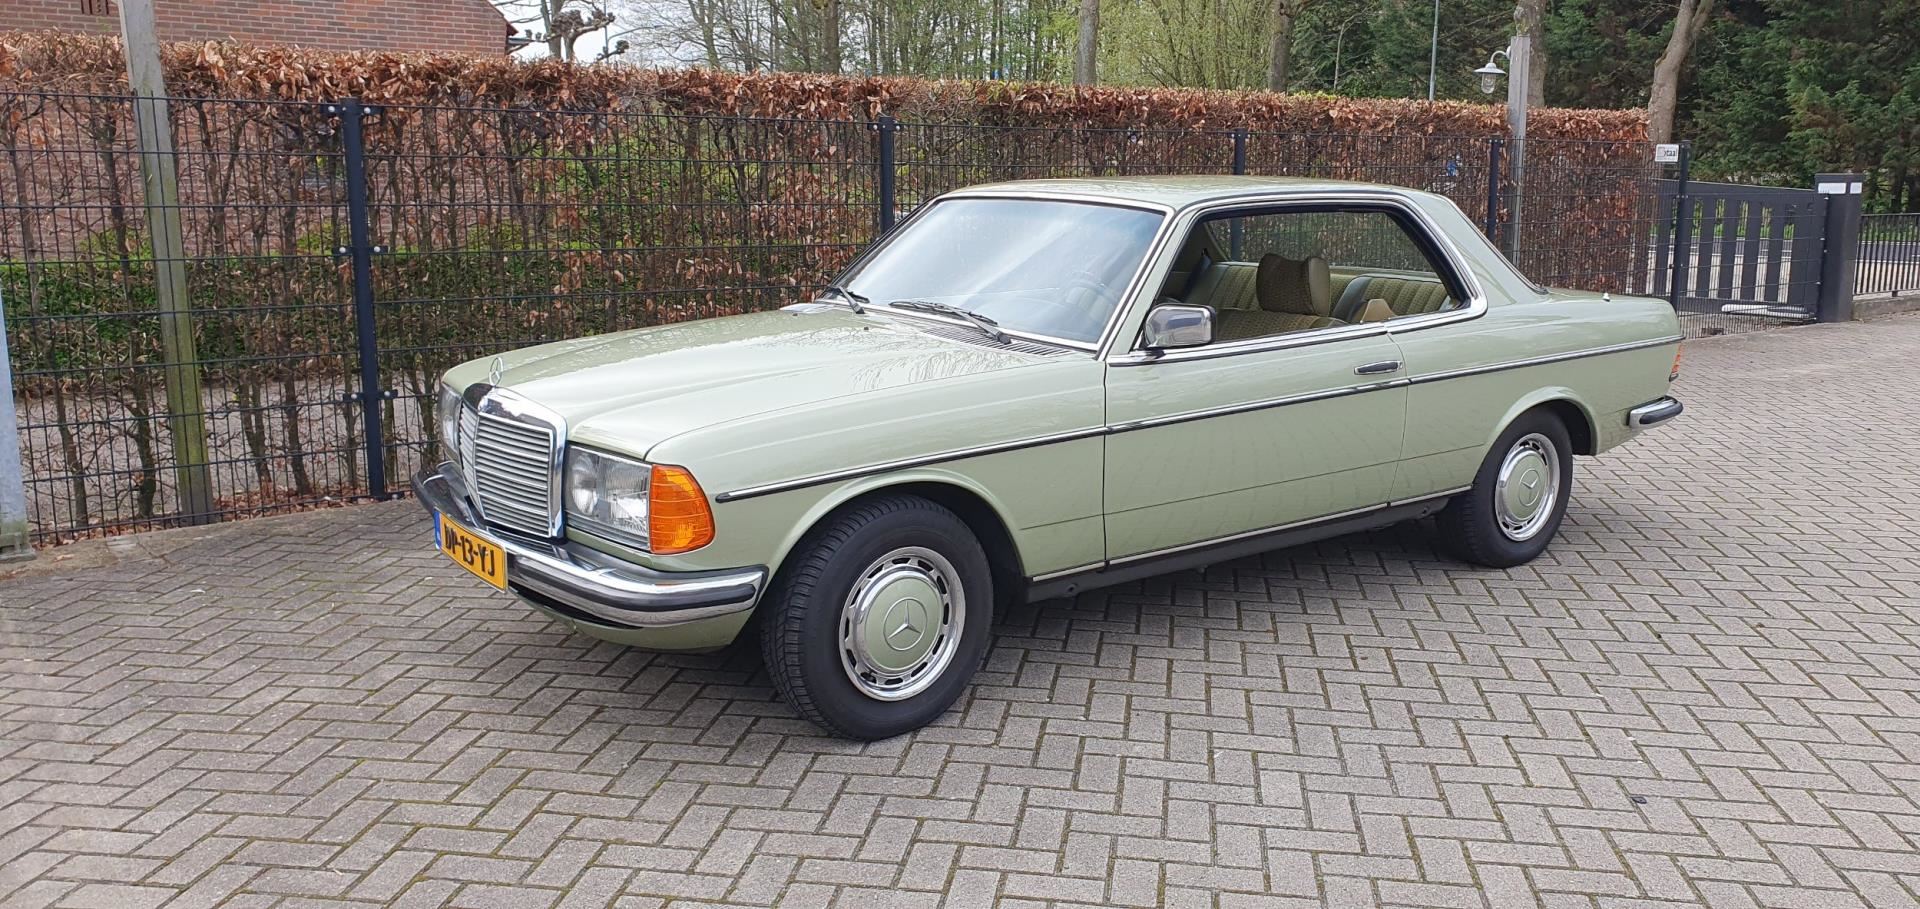 Mercedes-Benz 200-280 W123 occasion - Net-Cars